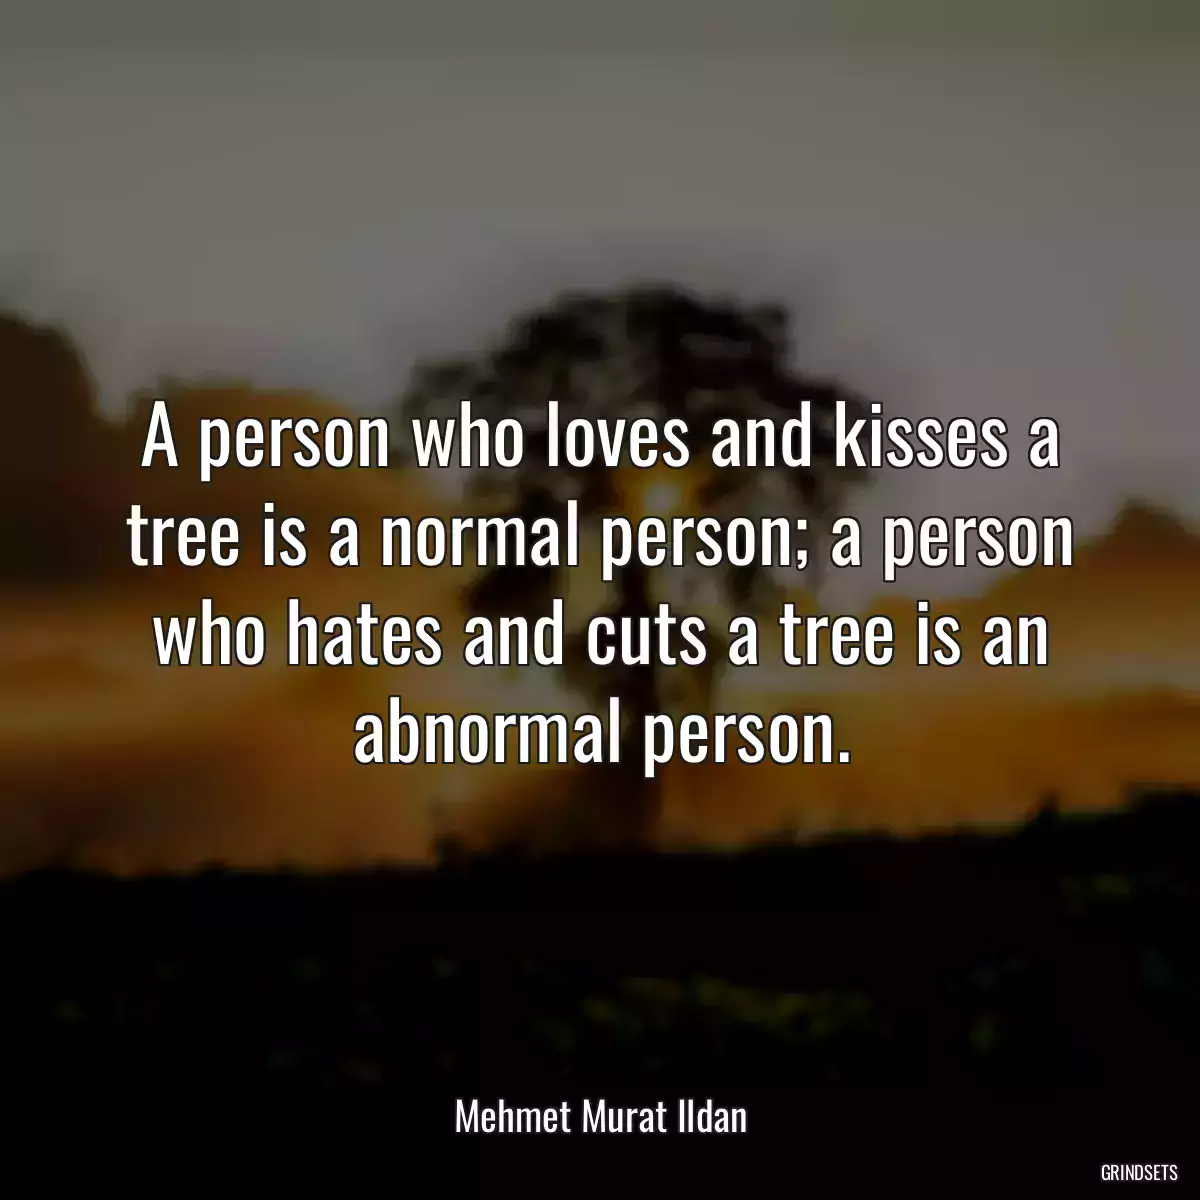 A person who loves and kisses a tree is a normal person; a person who hates and cuts a tree is an abnormal person.